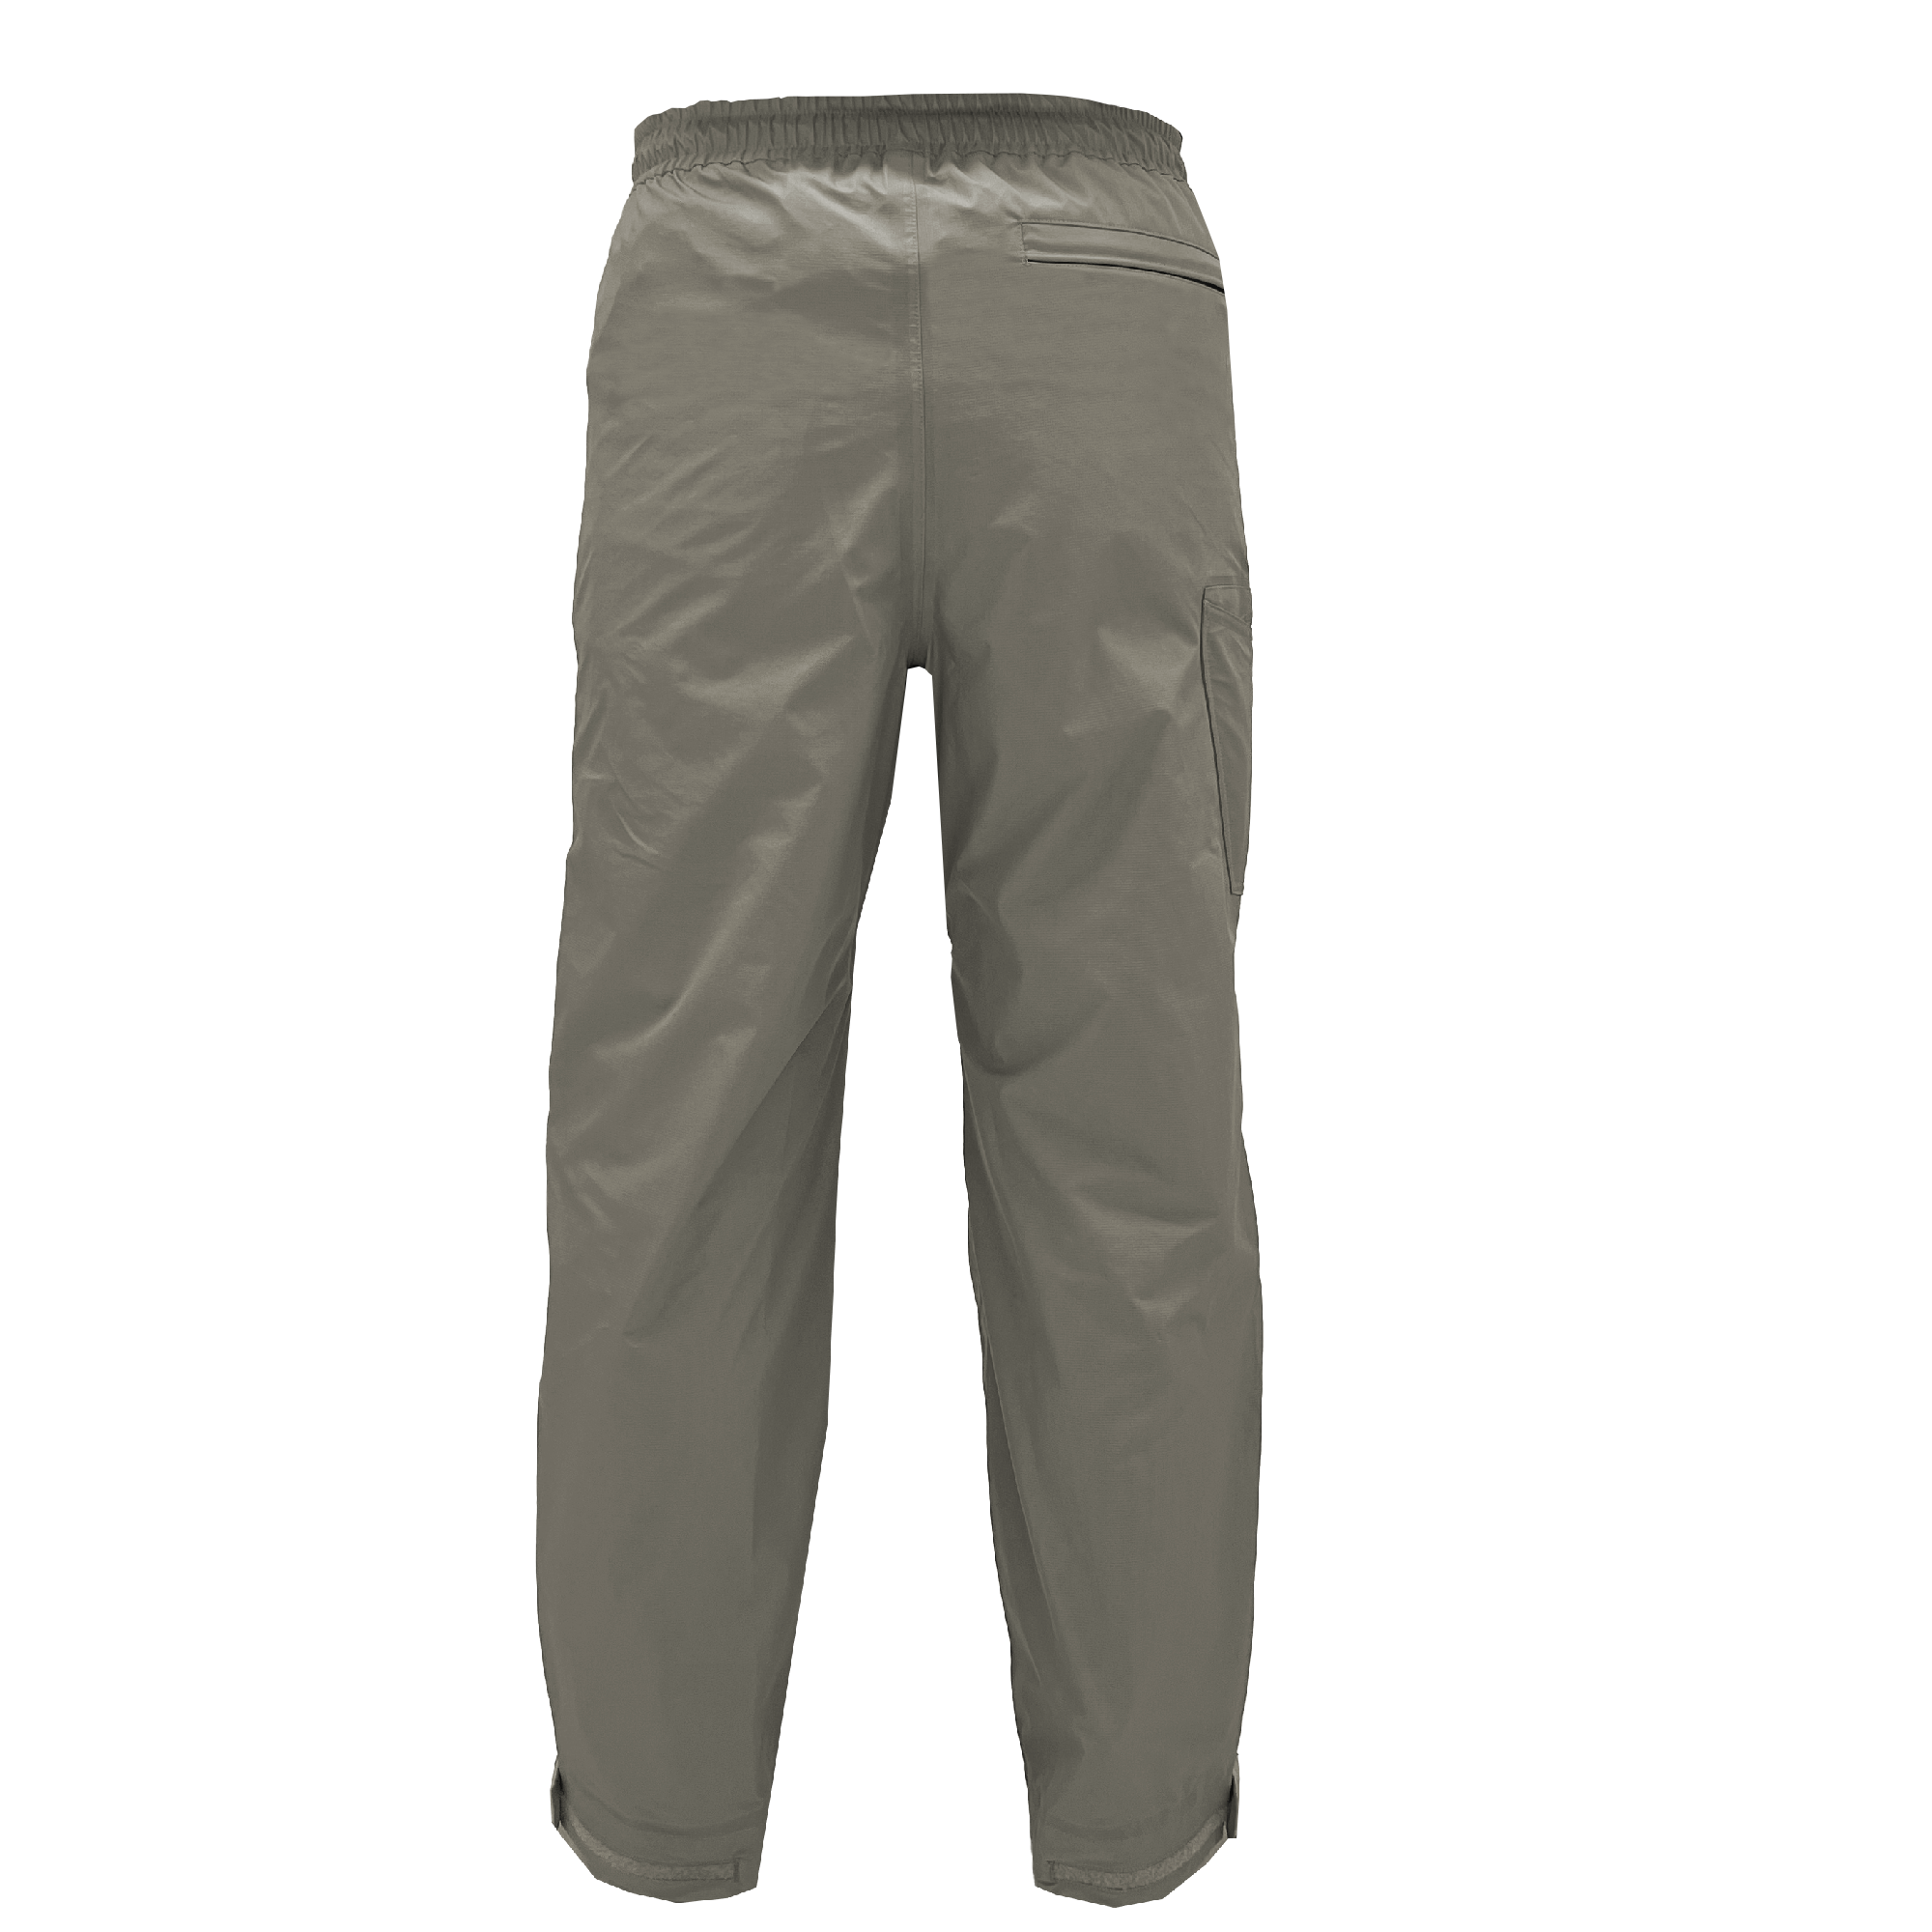 Baffin Outer Shell Pants - Mountain Grey